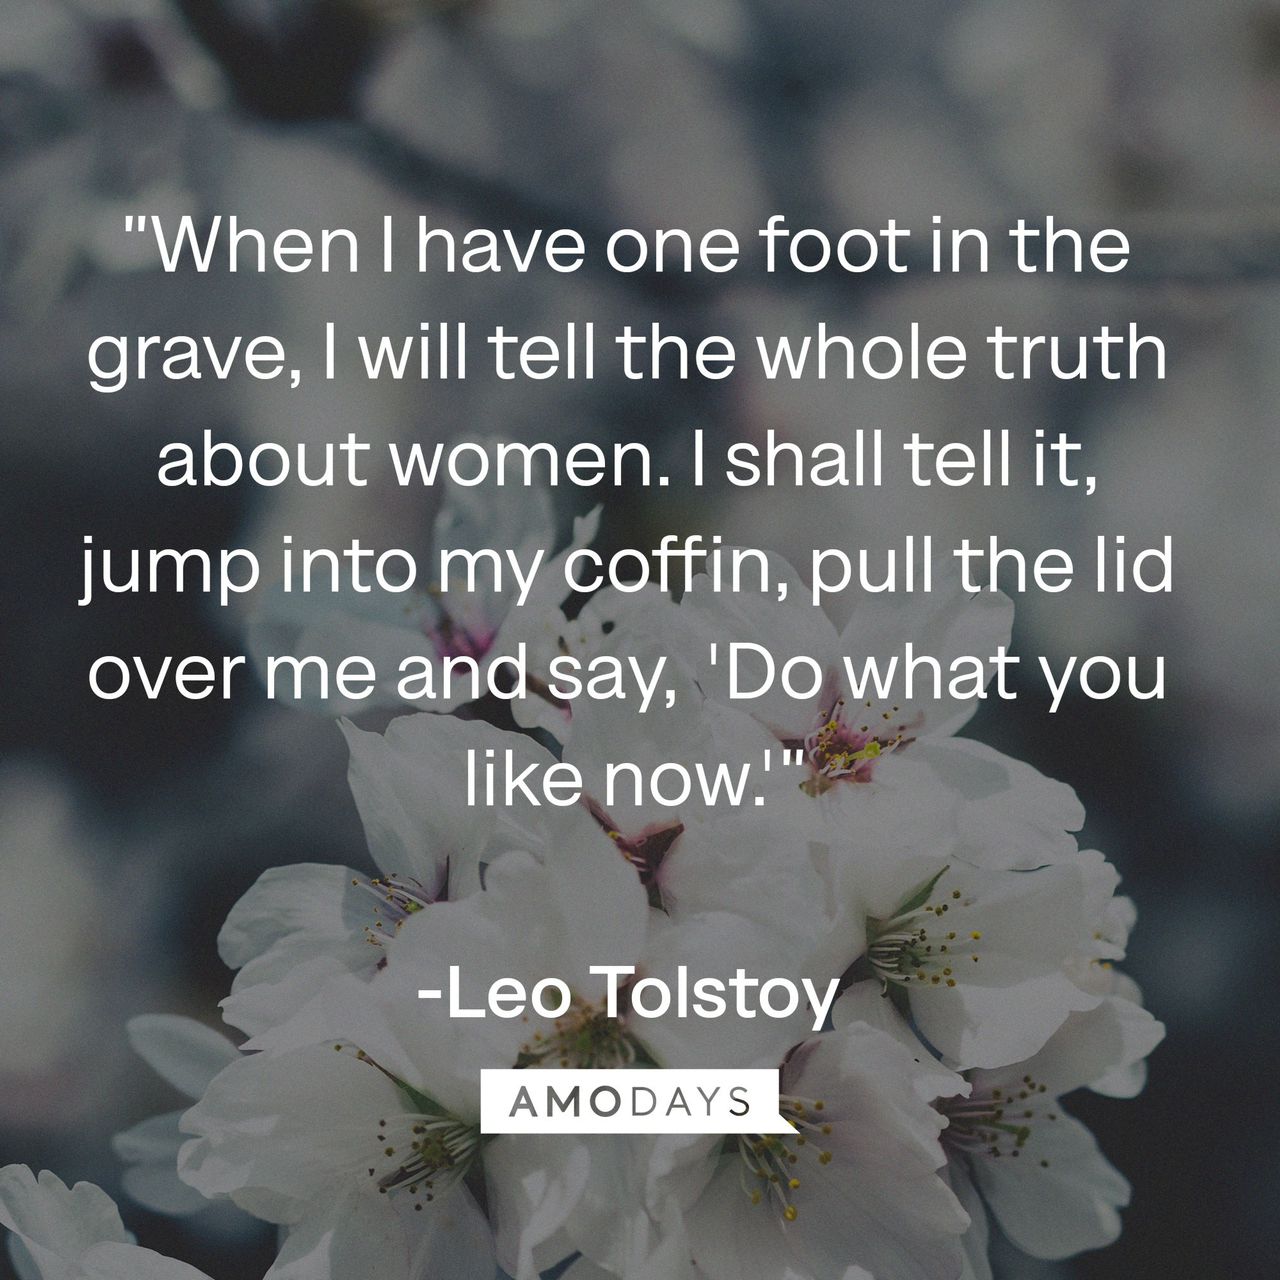 Leo Tolstoy's quote : "When I have one foot in the grave, I will tell the whole truth about women. I shall tell it, jump into my coffin, pull the lid over me and say, "Do what you like now."  | Image: AmoDays